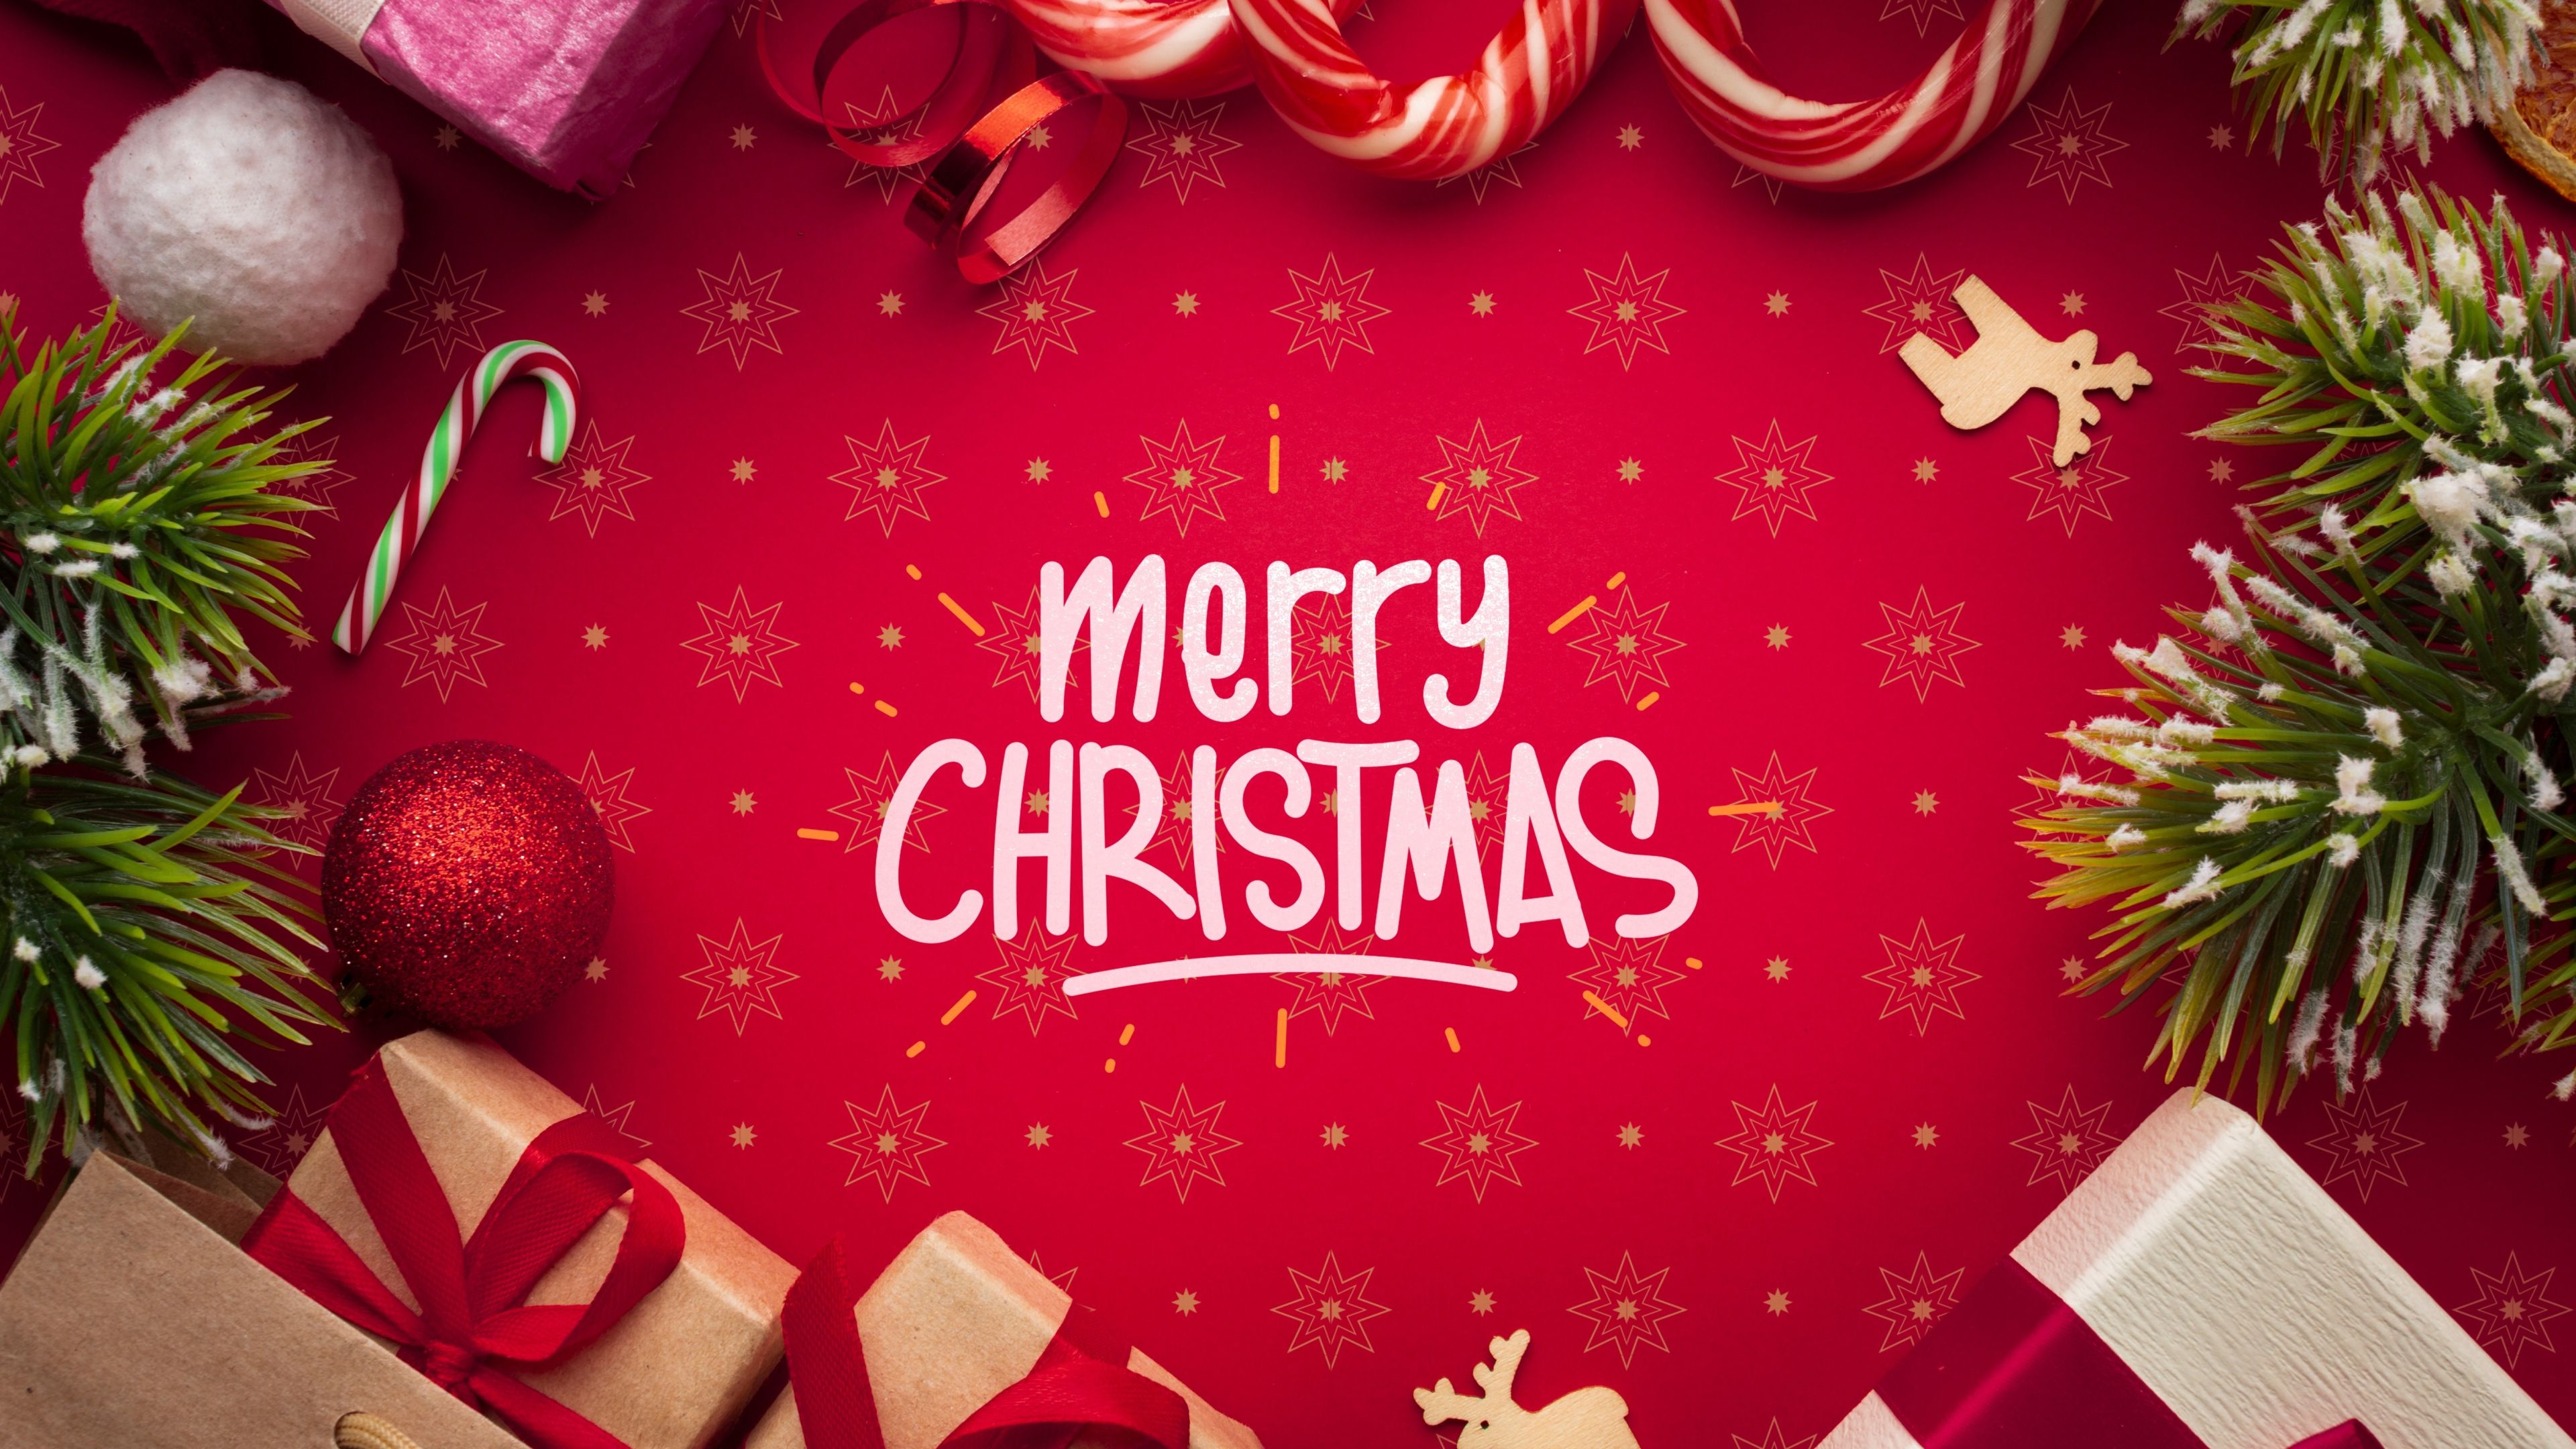 Wallpaper Of Candy Cane, Christmas, Gift, Merry Christmas Christmas Image Download 2020